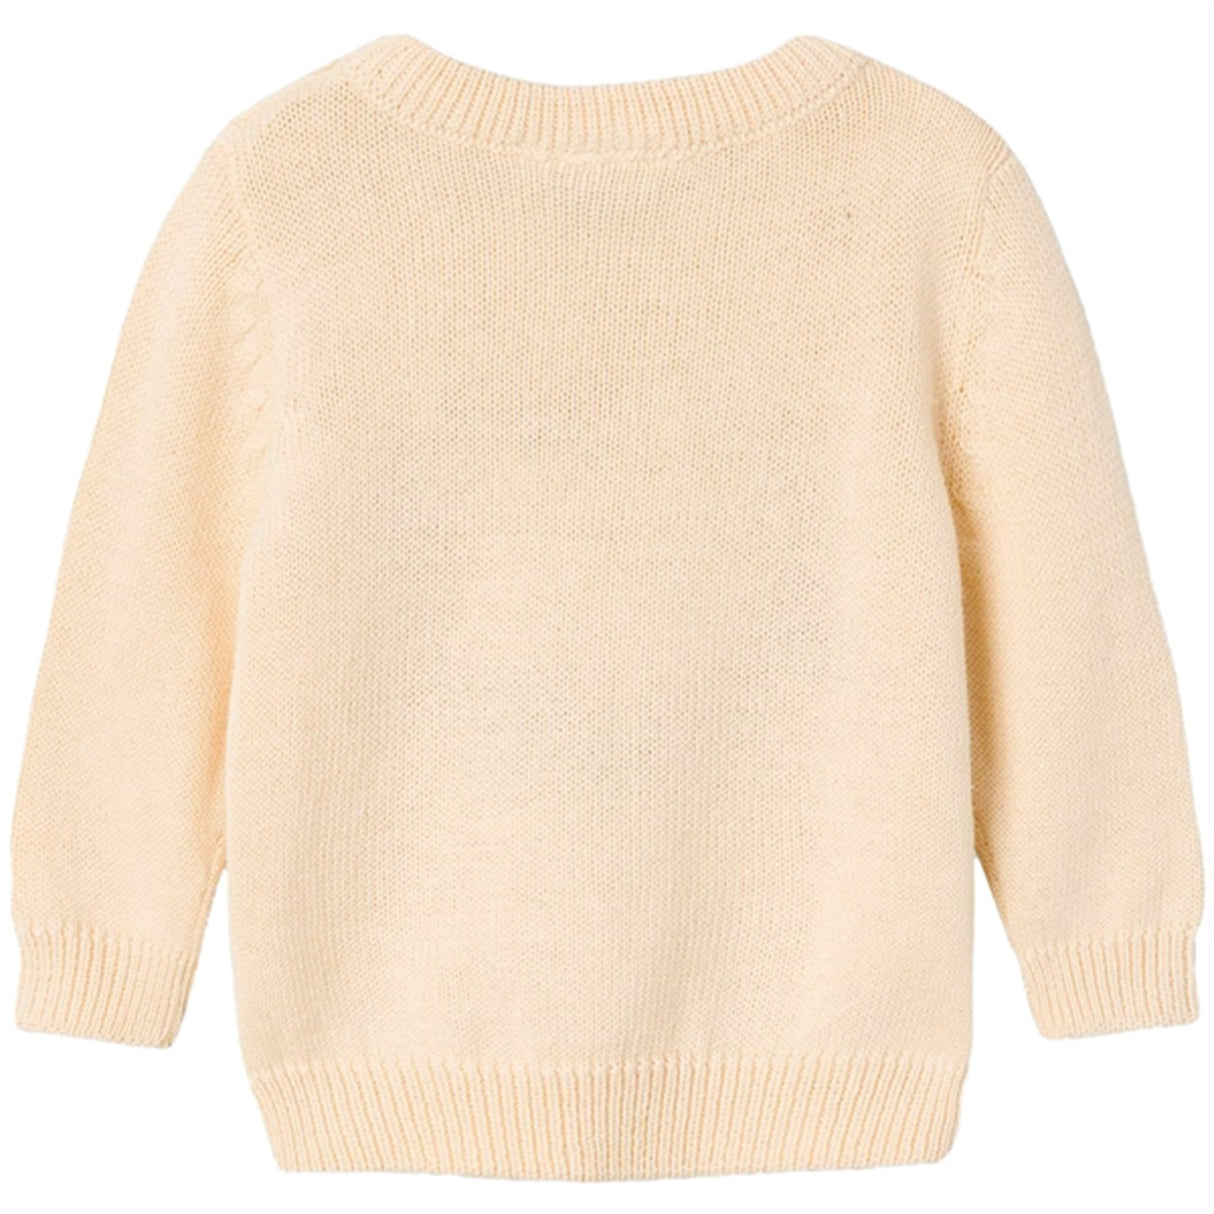 Name it Buttercream Lifine Knit Sweater 2